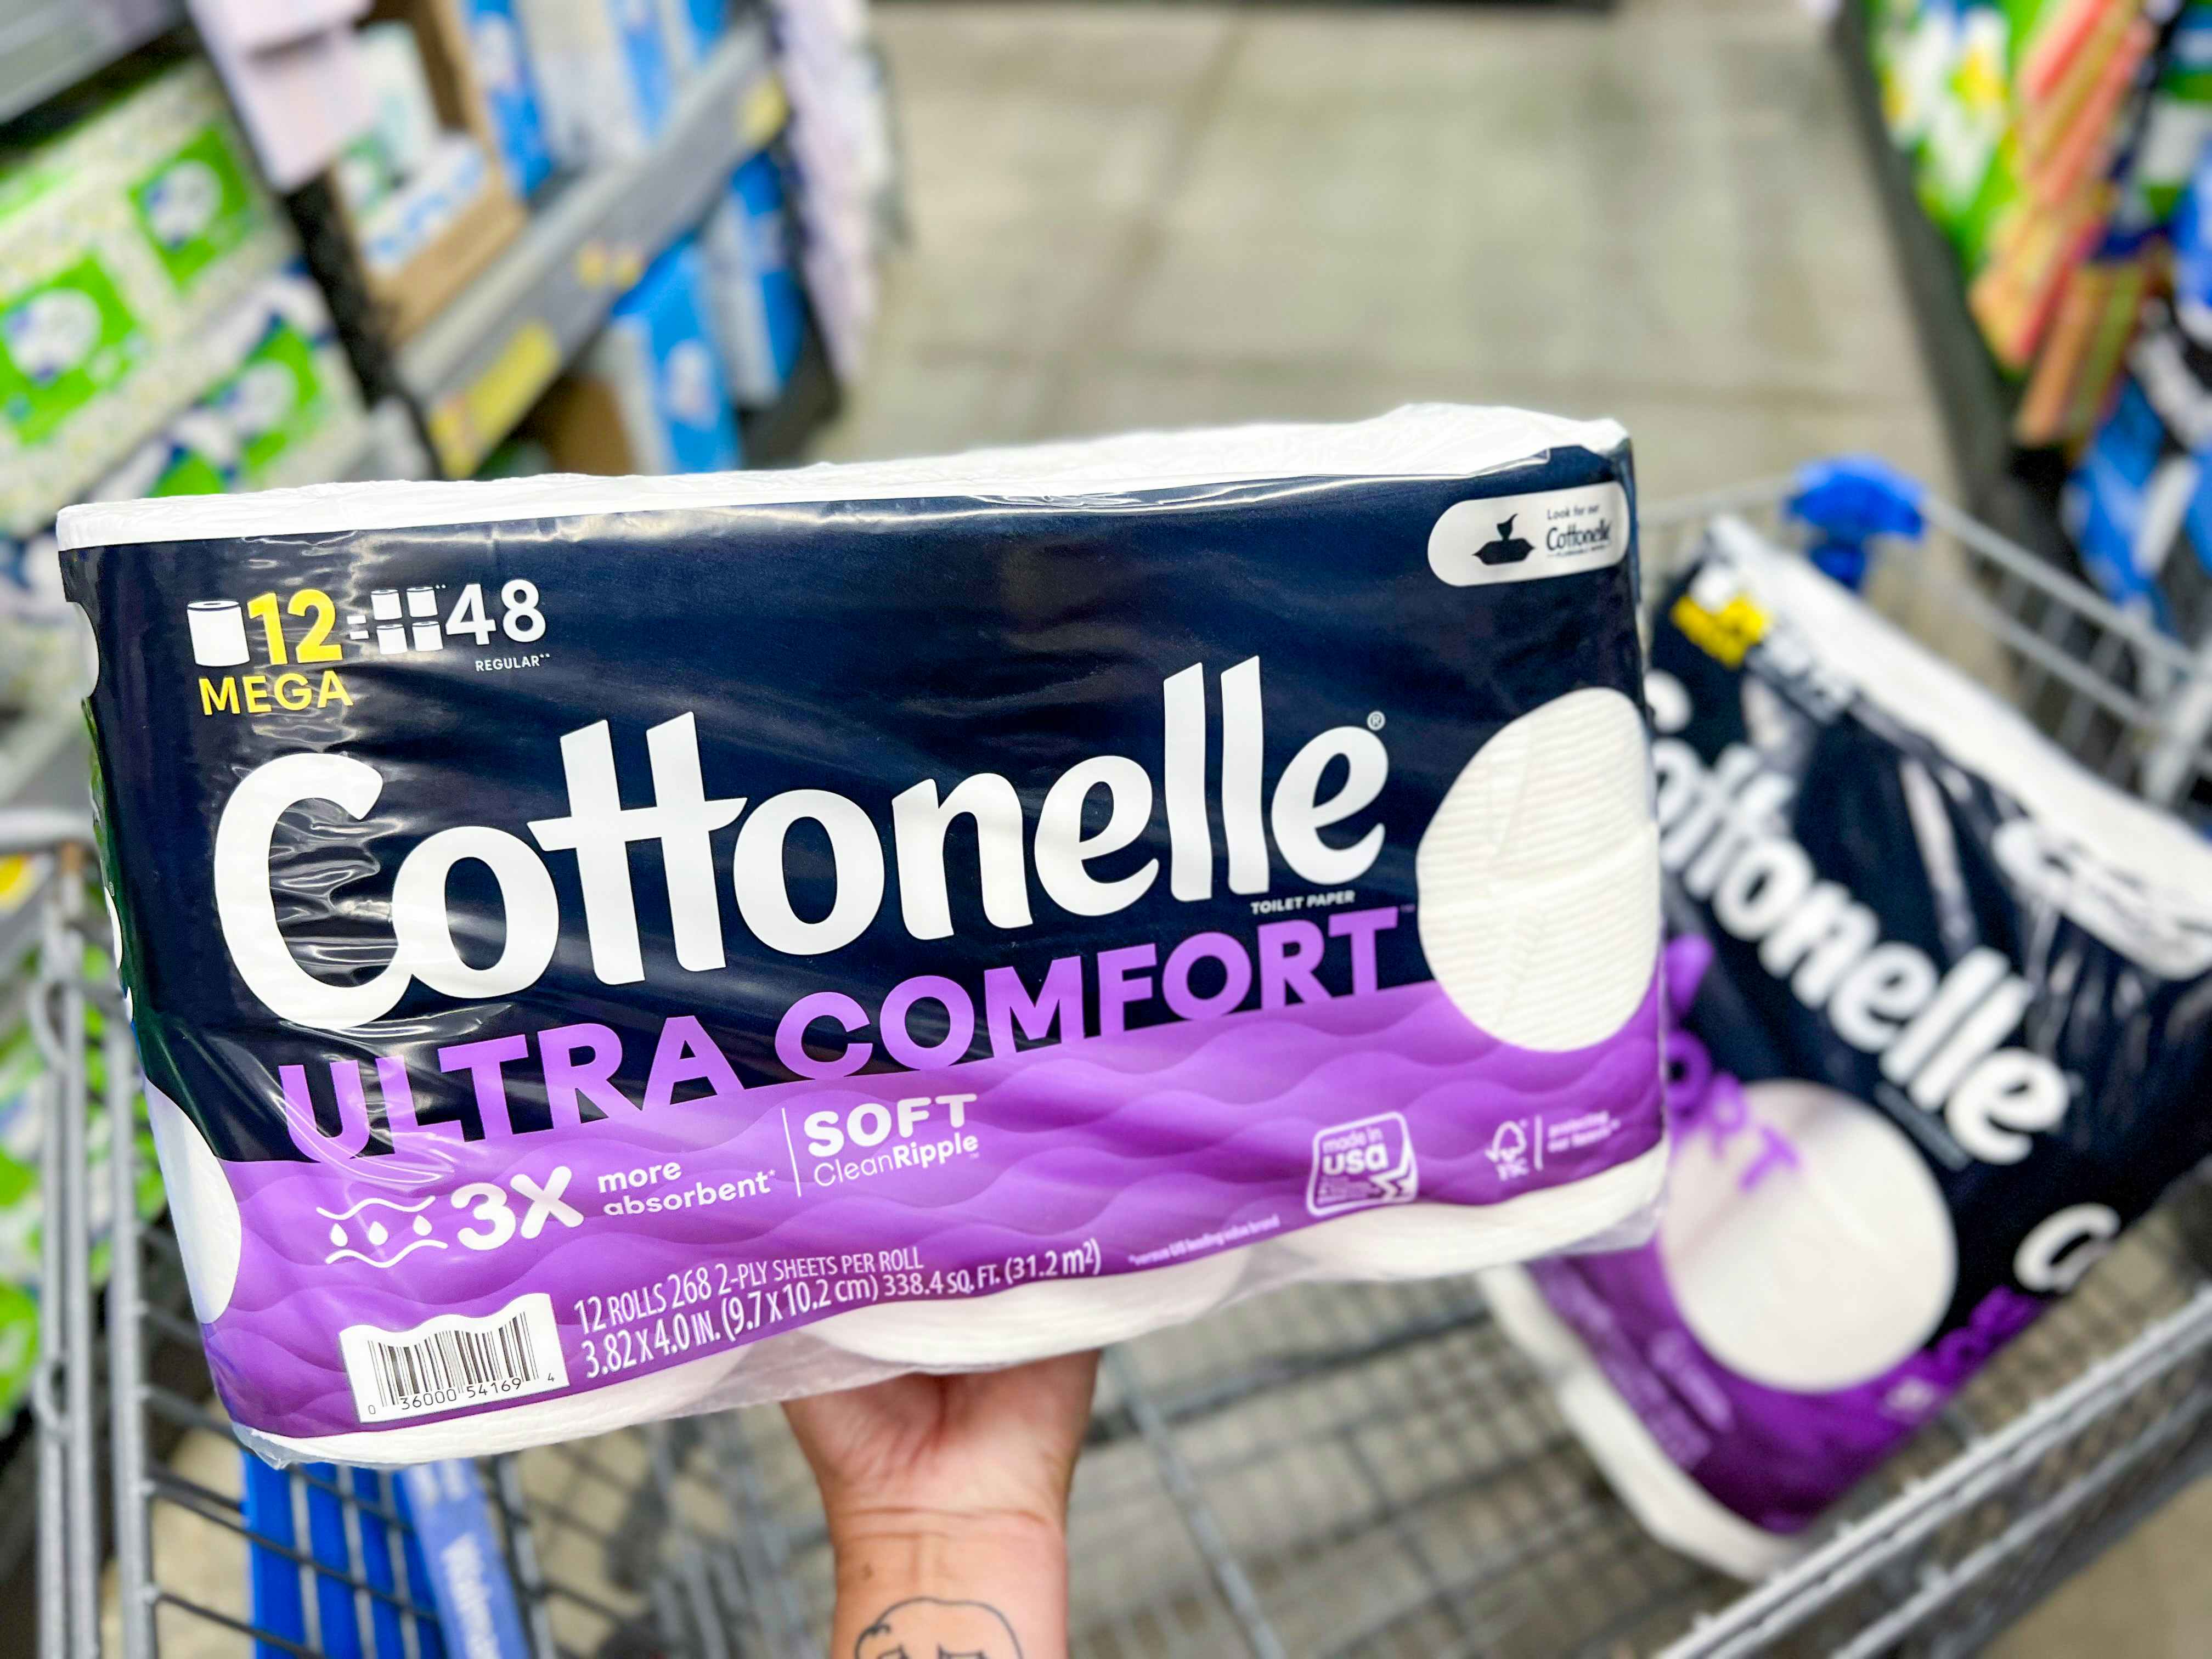 Cottonelle Toilet Paper Deals: Get 24 Rolls for as Low as $17.31 on Amazon